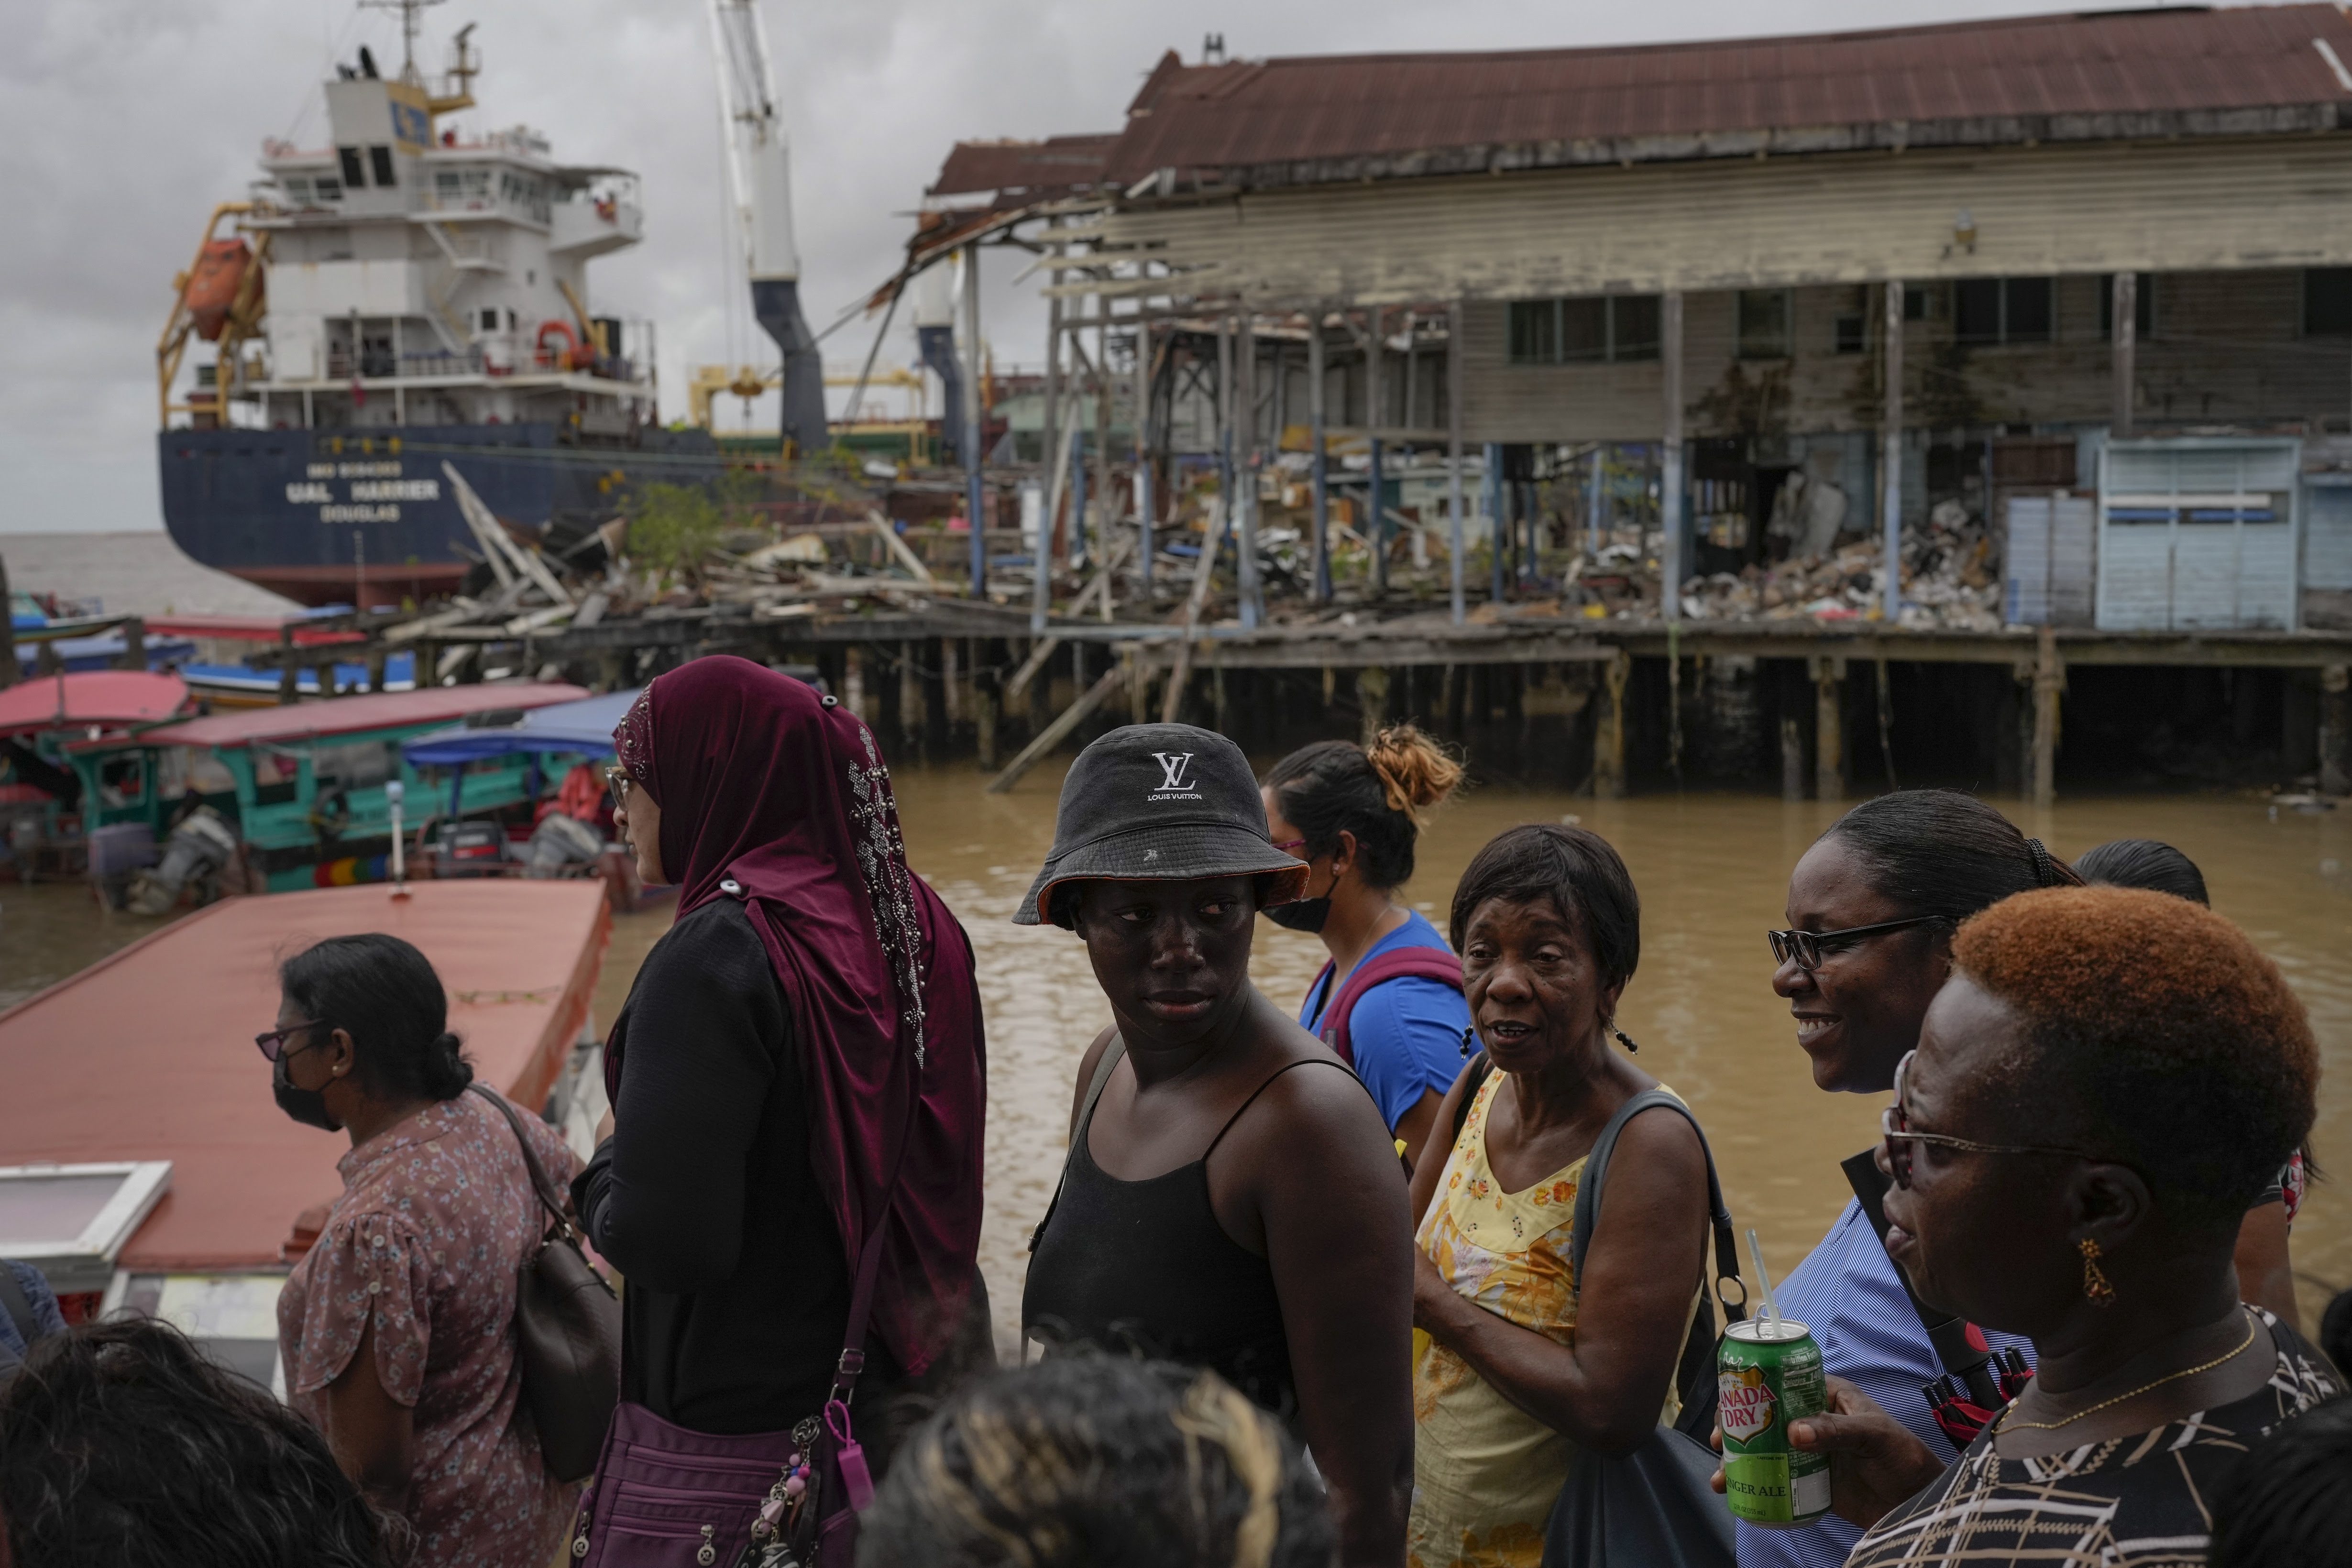 People wait at the Stabroek Market to ferry across the Demerara River, near a container ship in Georgetown, Guyana